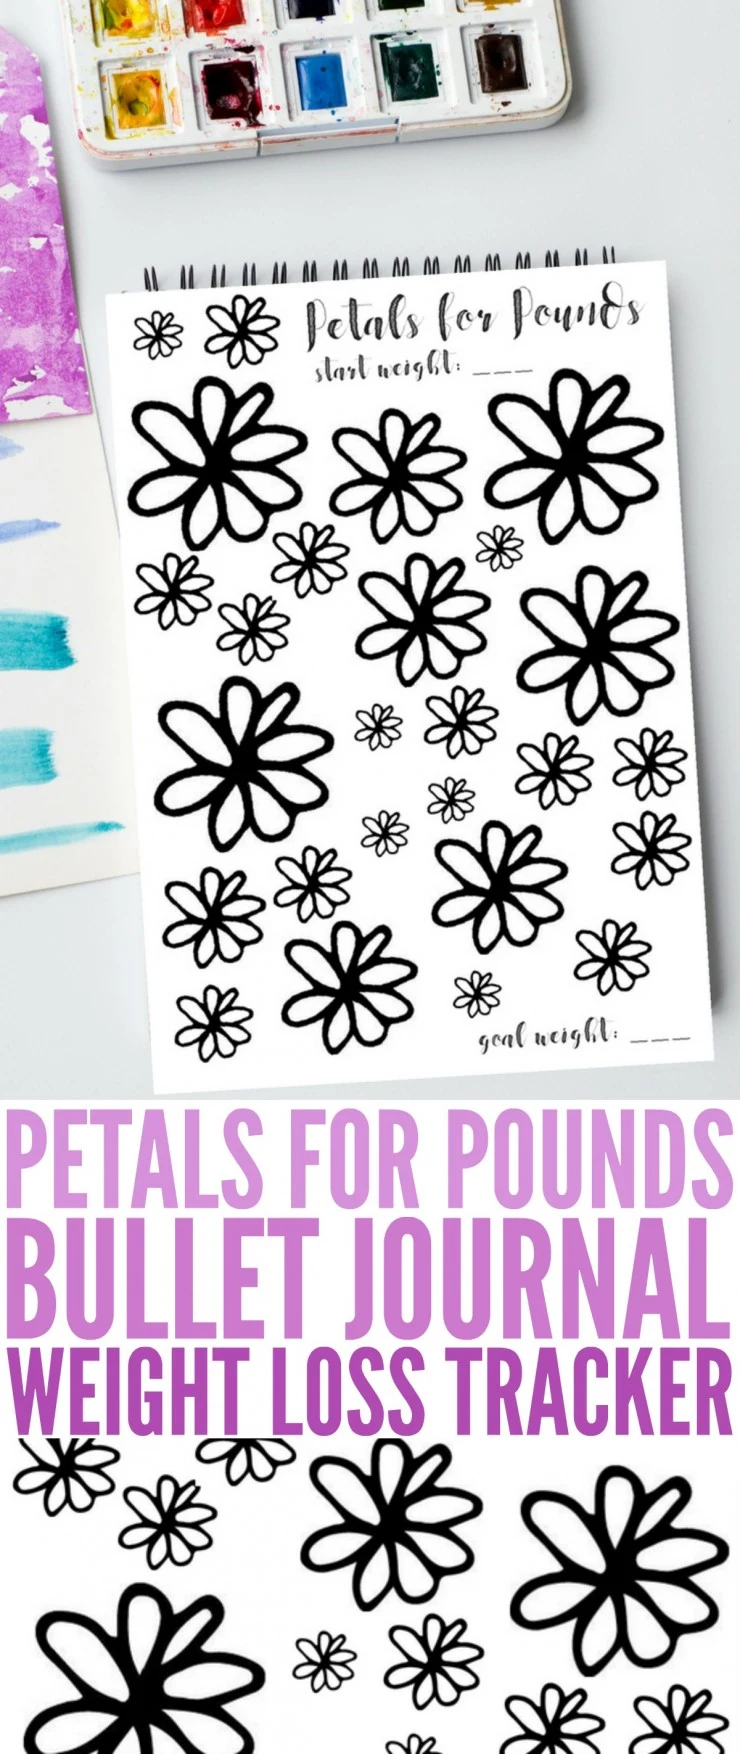 Bullet Journaling is huge right now and for good reason. This "Petals for Pounds" Bullet Journal Weight Loss Tracker page is perfect to help you hit your  New Year's weight loss goals and resolutions. Journalers can use this tracker to colour in and track pounds lost towards their goal weight.